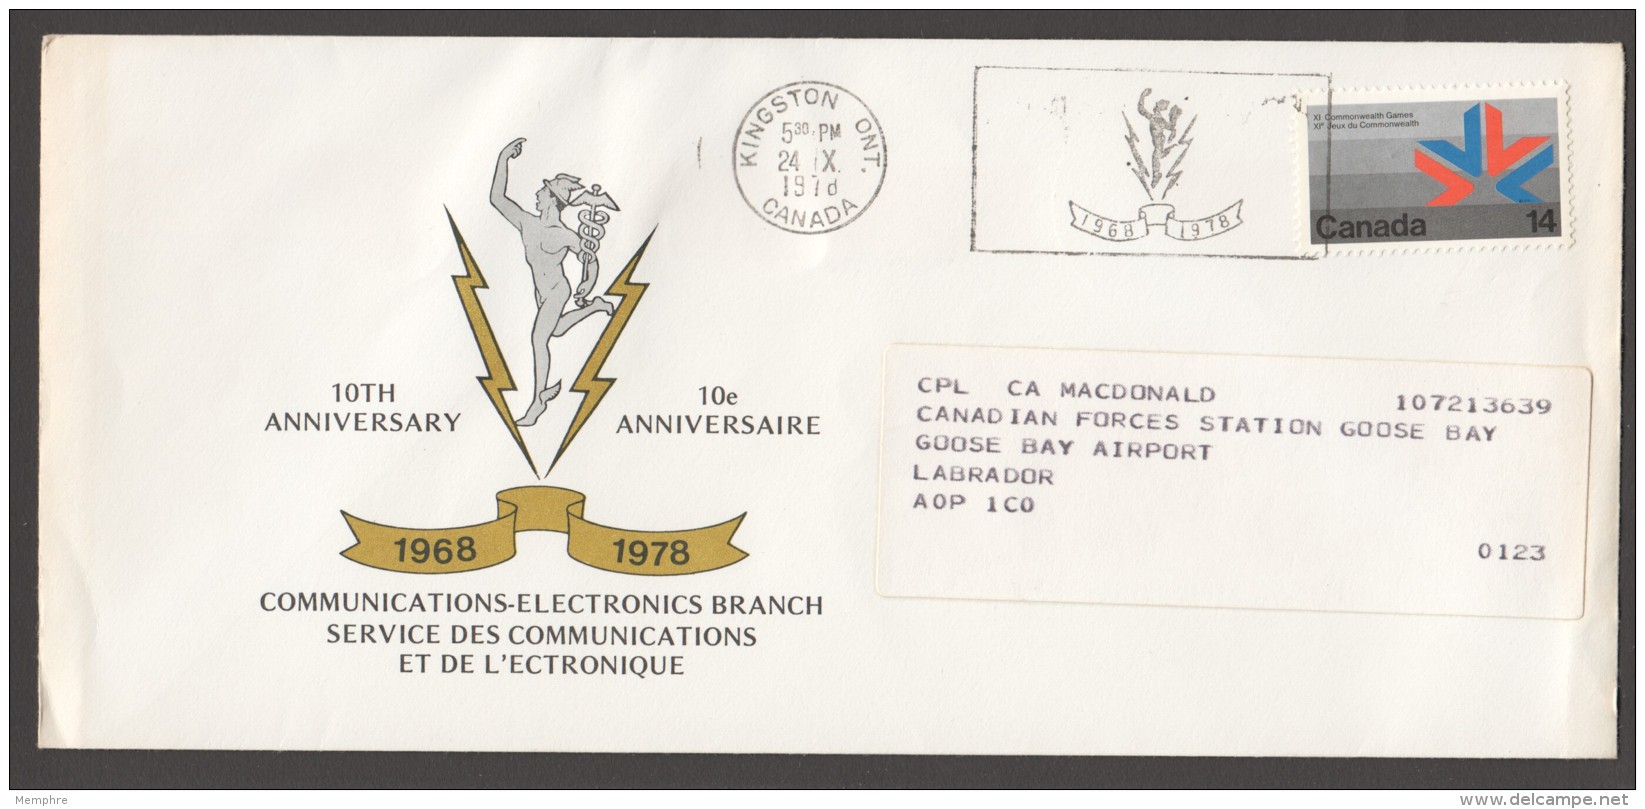 MILITARY -  Canadian Forces Communication-Electronic Branch - Special Cancel - HerdenkingsOmslagen